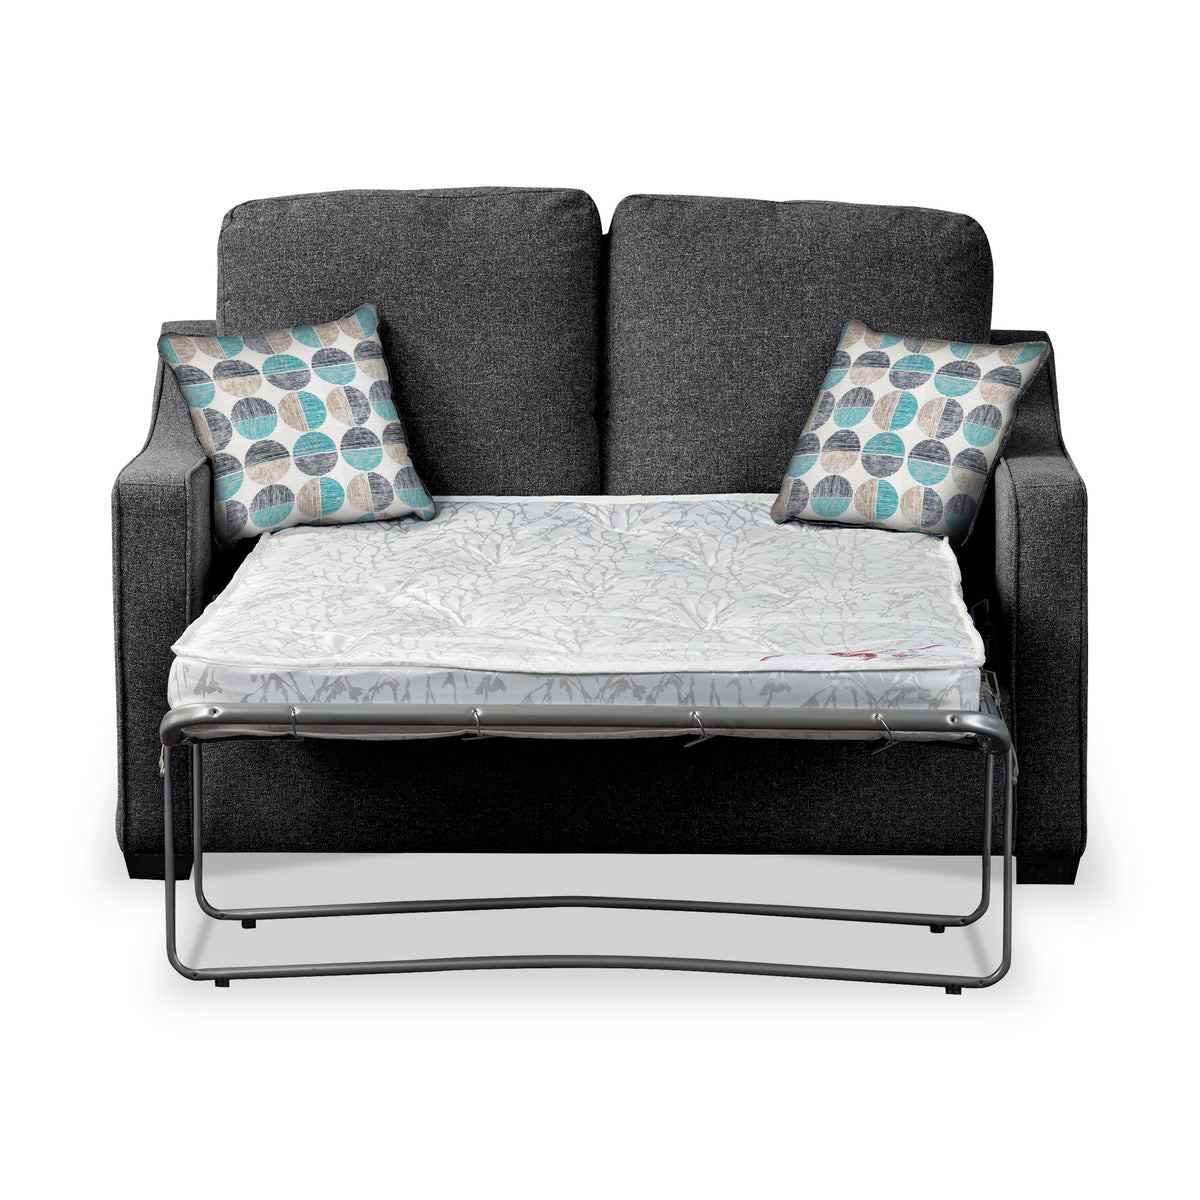 Charlcote Charcoal Faux Linen 2 Seater Sofabed with Duck Egg Scatter Cushions from Roseland Furniture